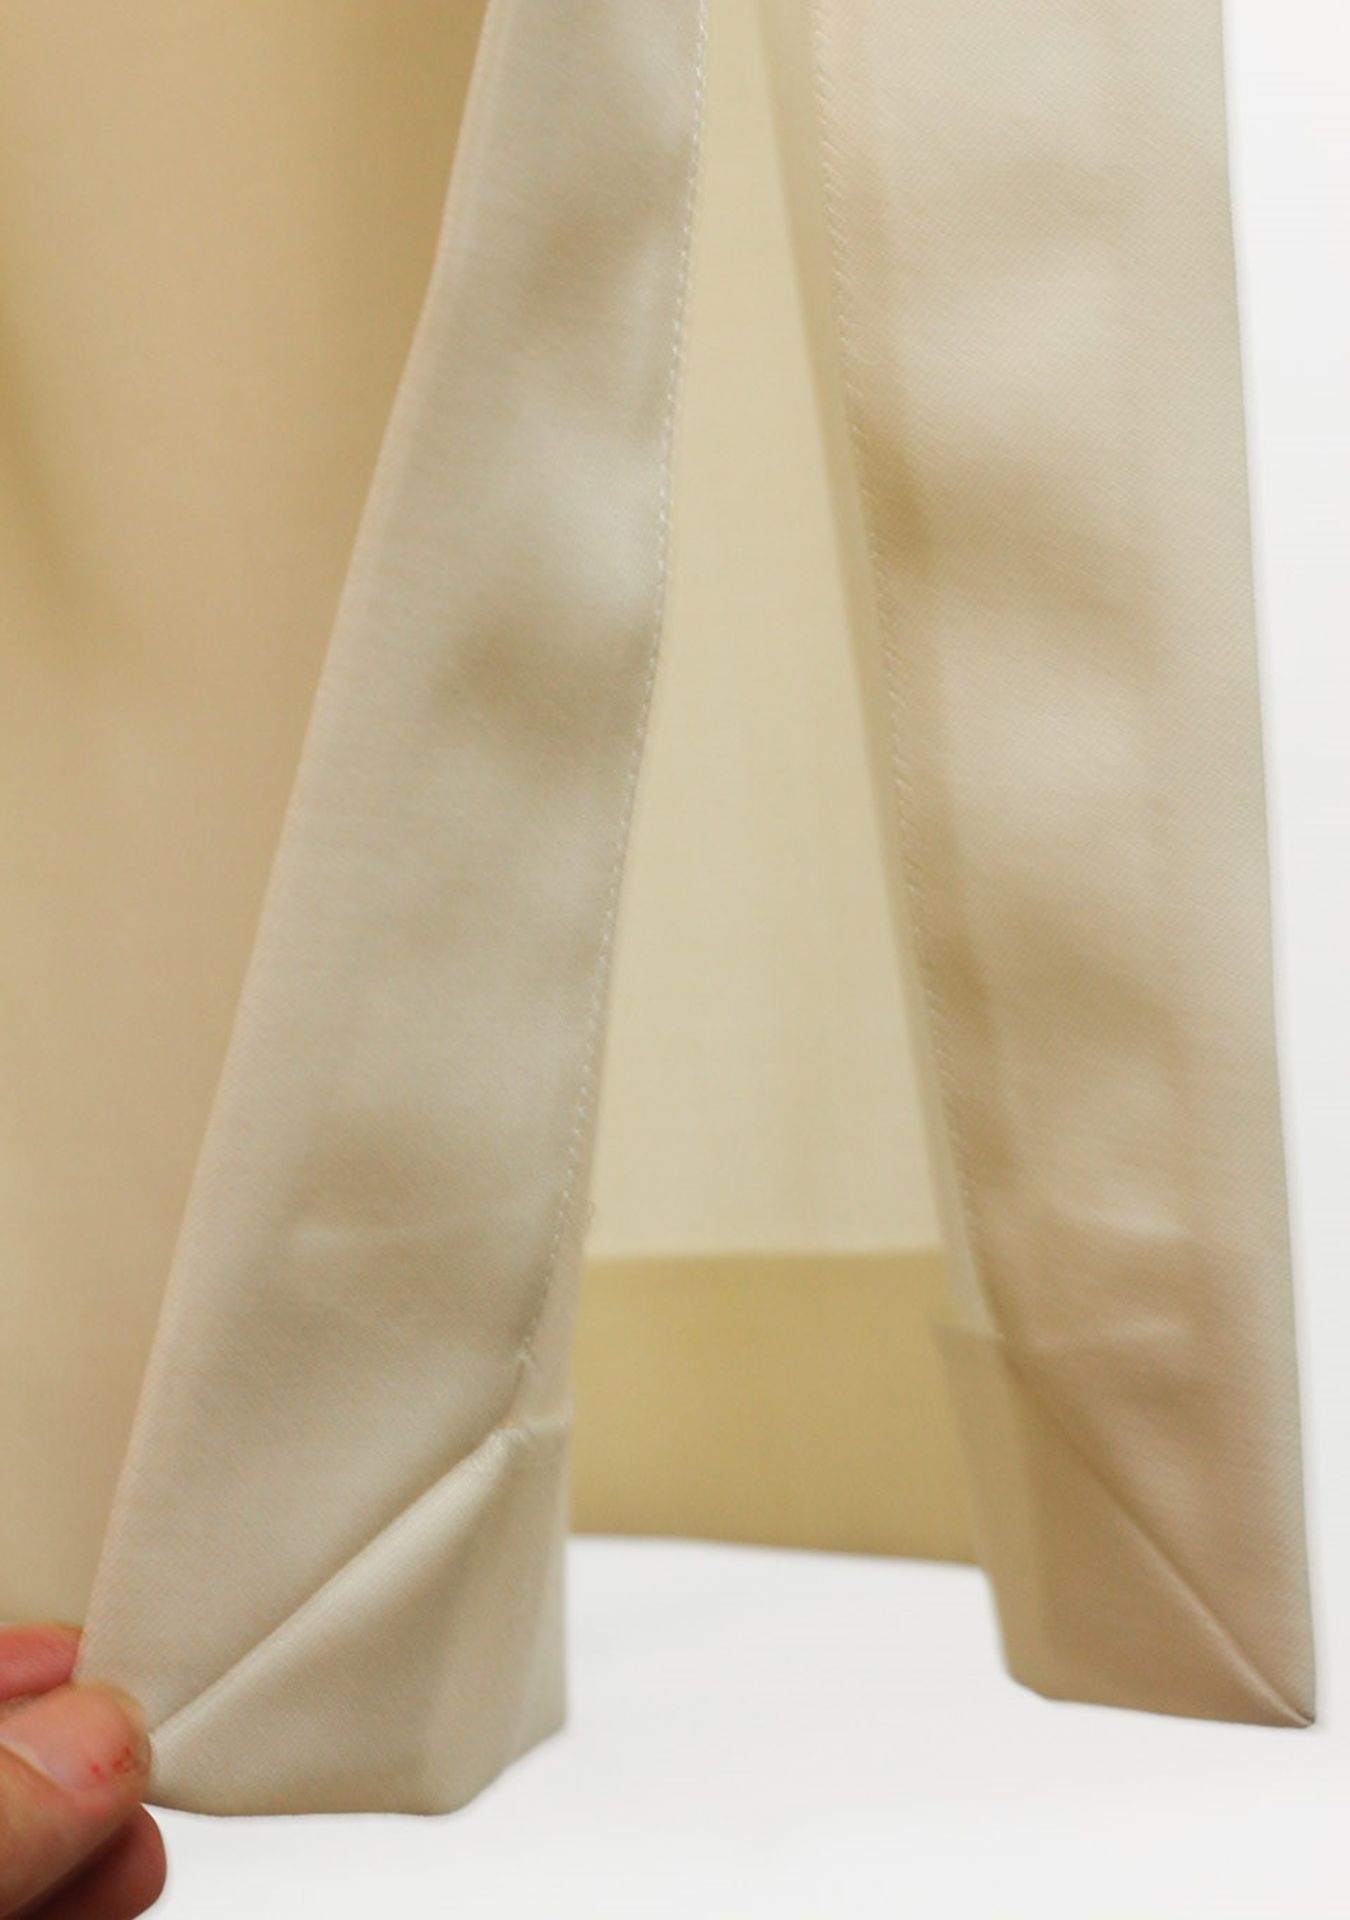 1 x Boutique Le Duc Cream Skirt - Size: 22 - Material: 100% Wool - From a High End Clothing Boutique - Image 7 of 10